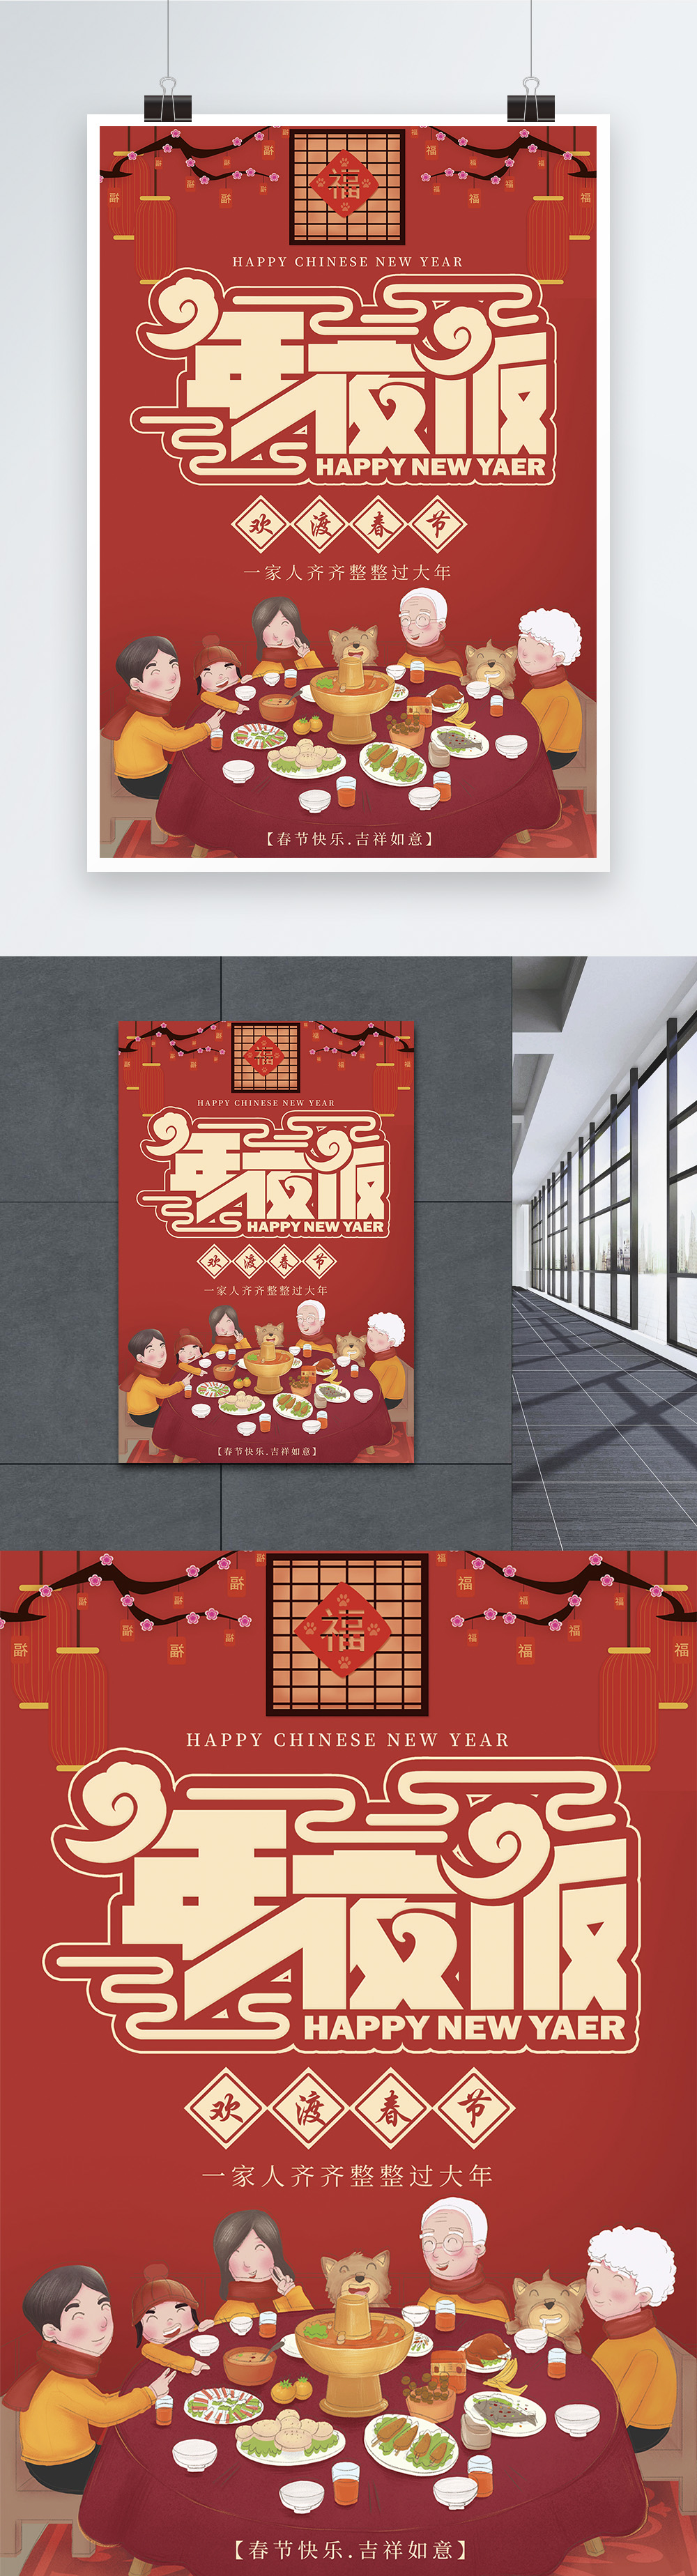 Red new years eve dinner posters template image_picture free download